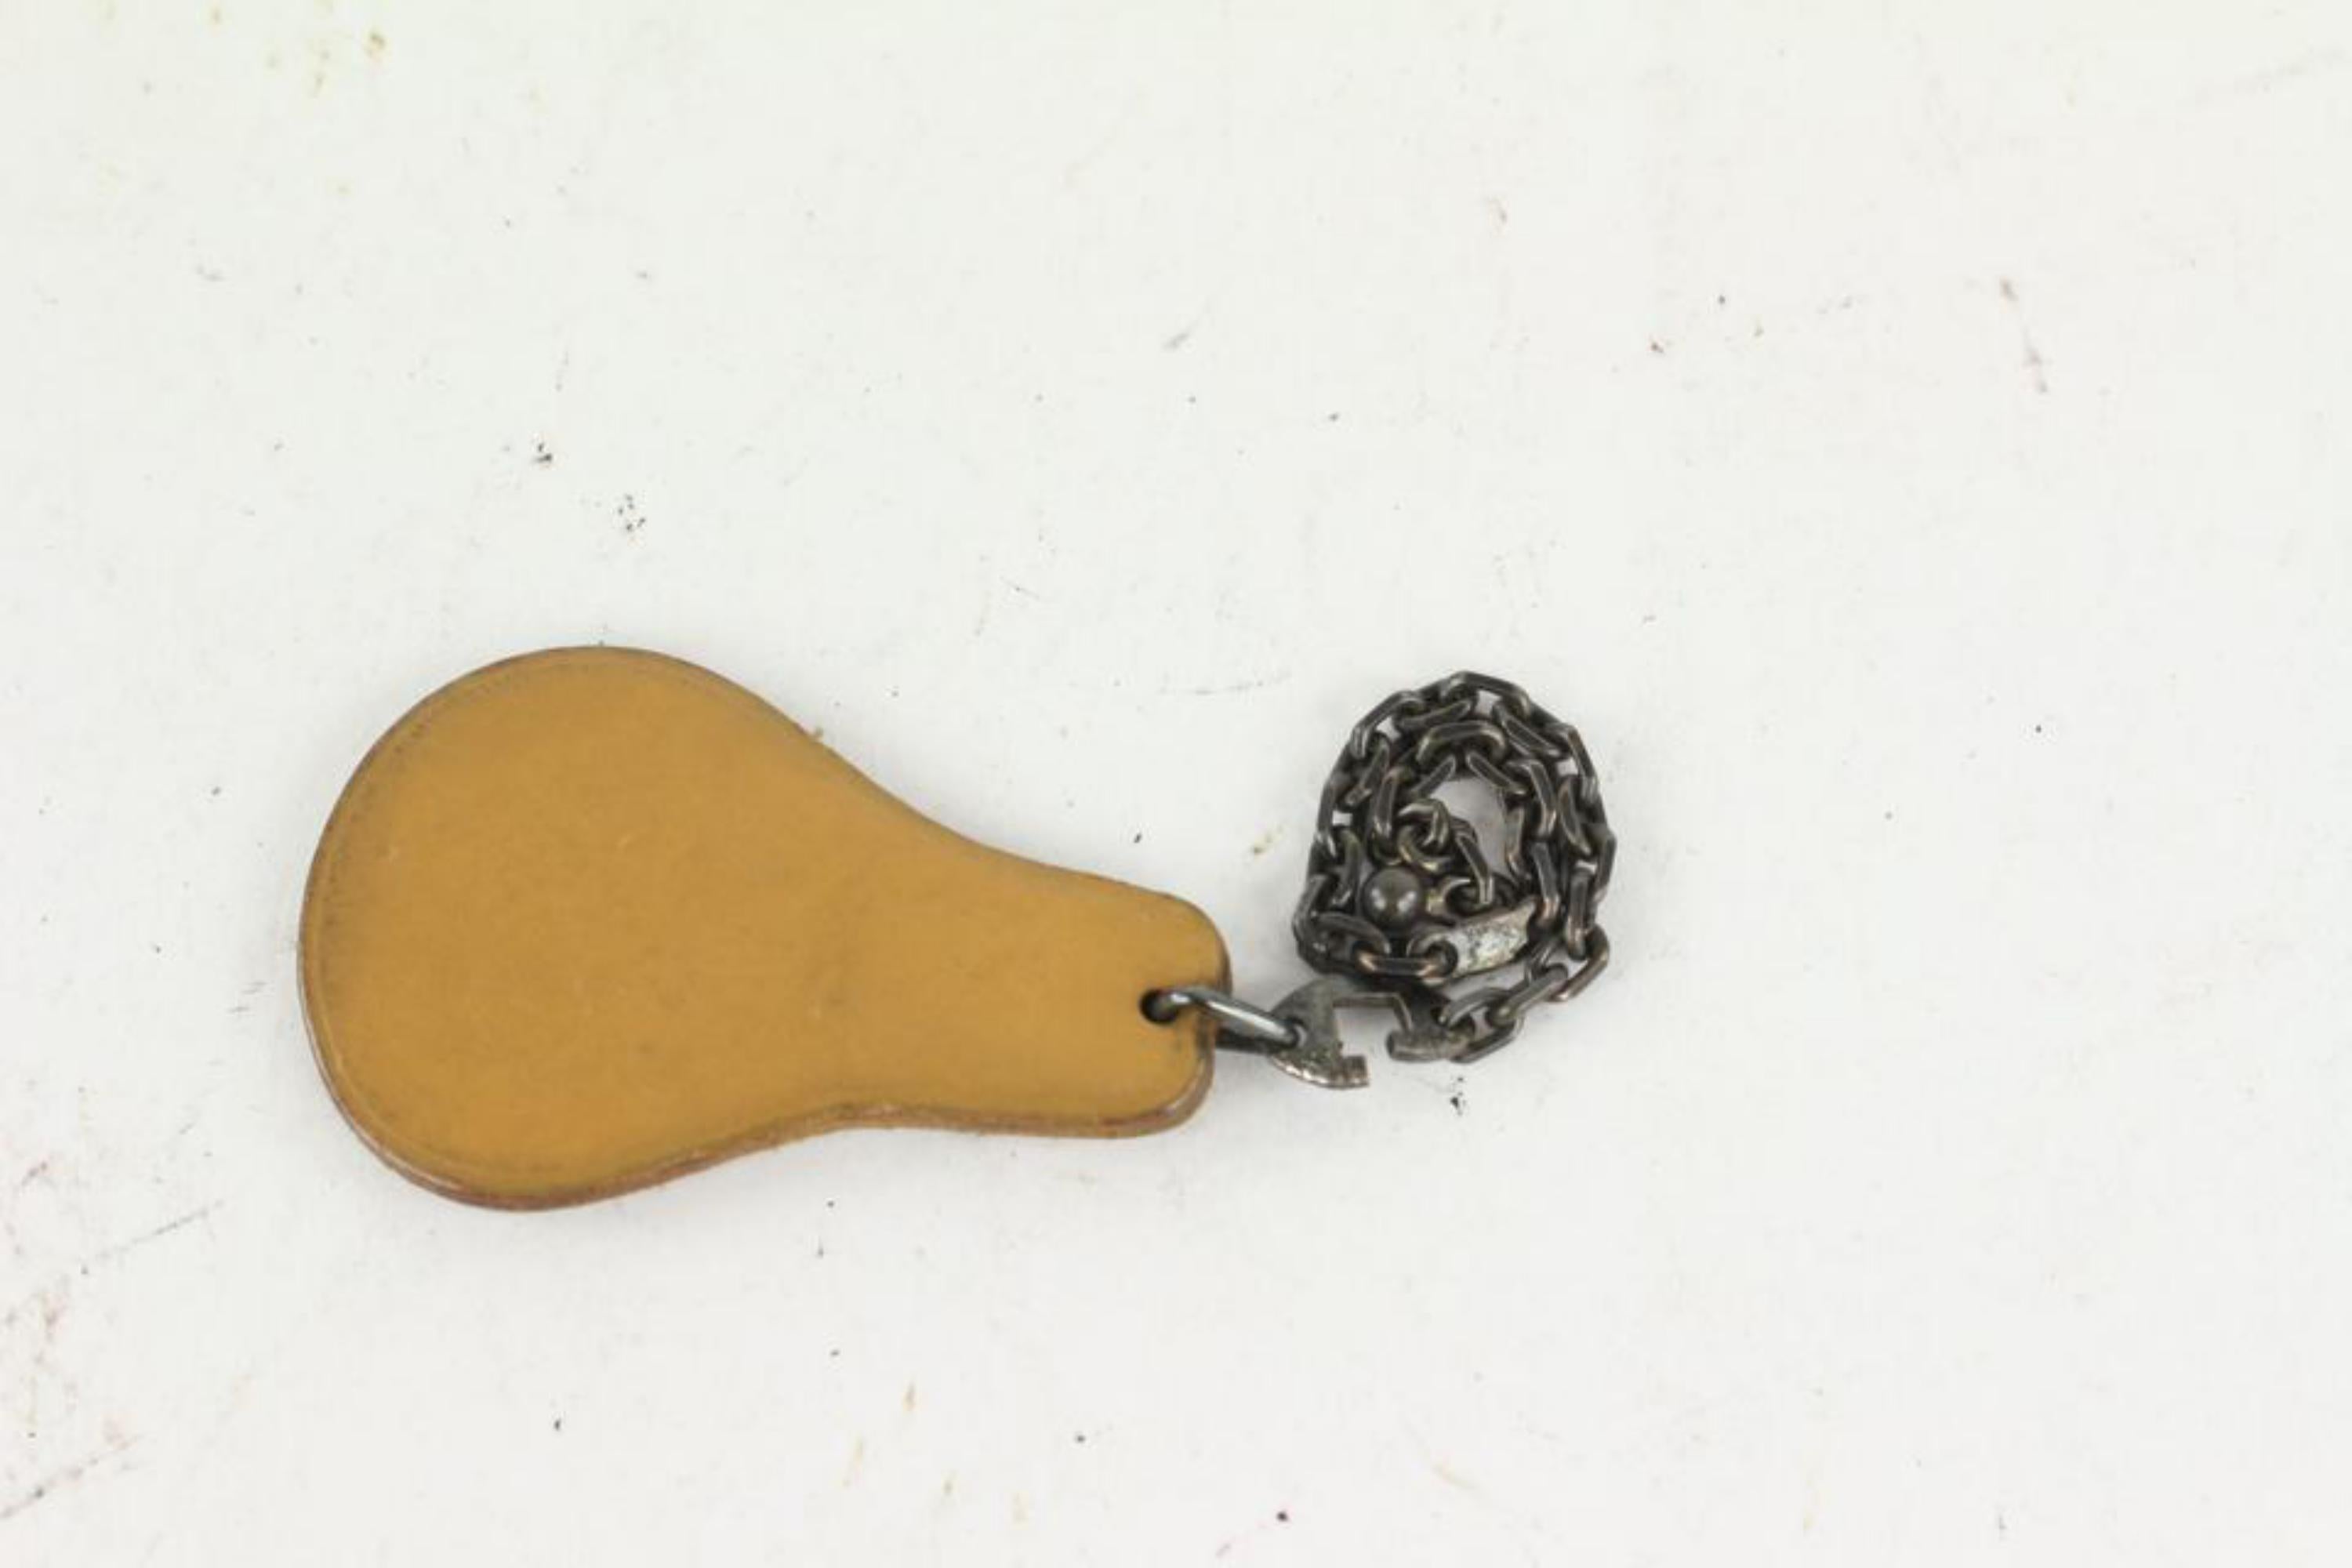 Hermès Pear Tan Leather Silver Bag Charm 1020h37 In Good Condition For Sale In Dix hills, NY